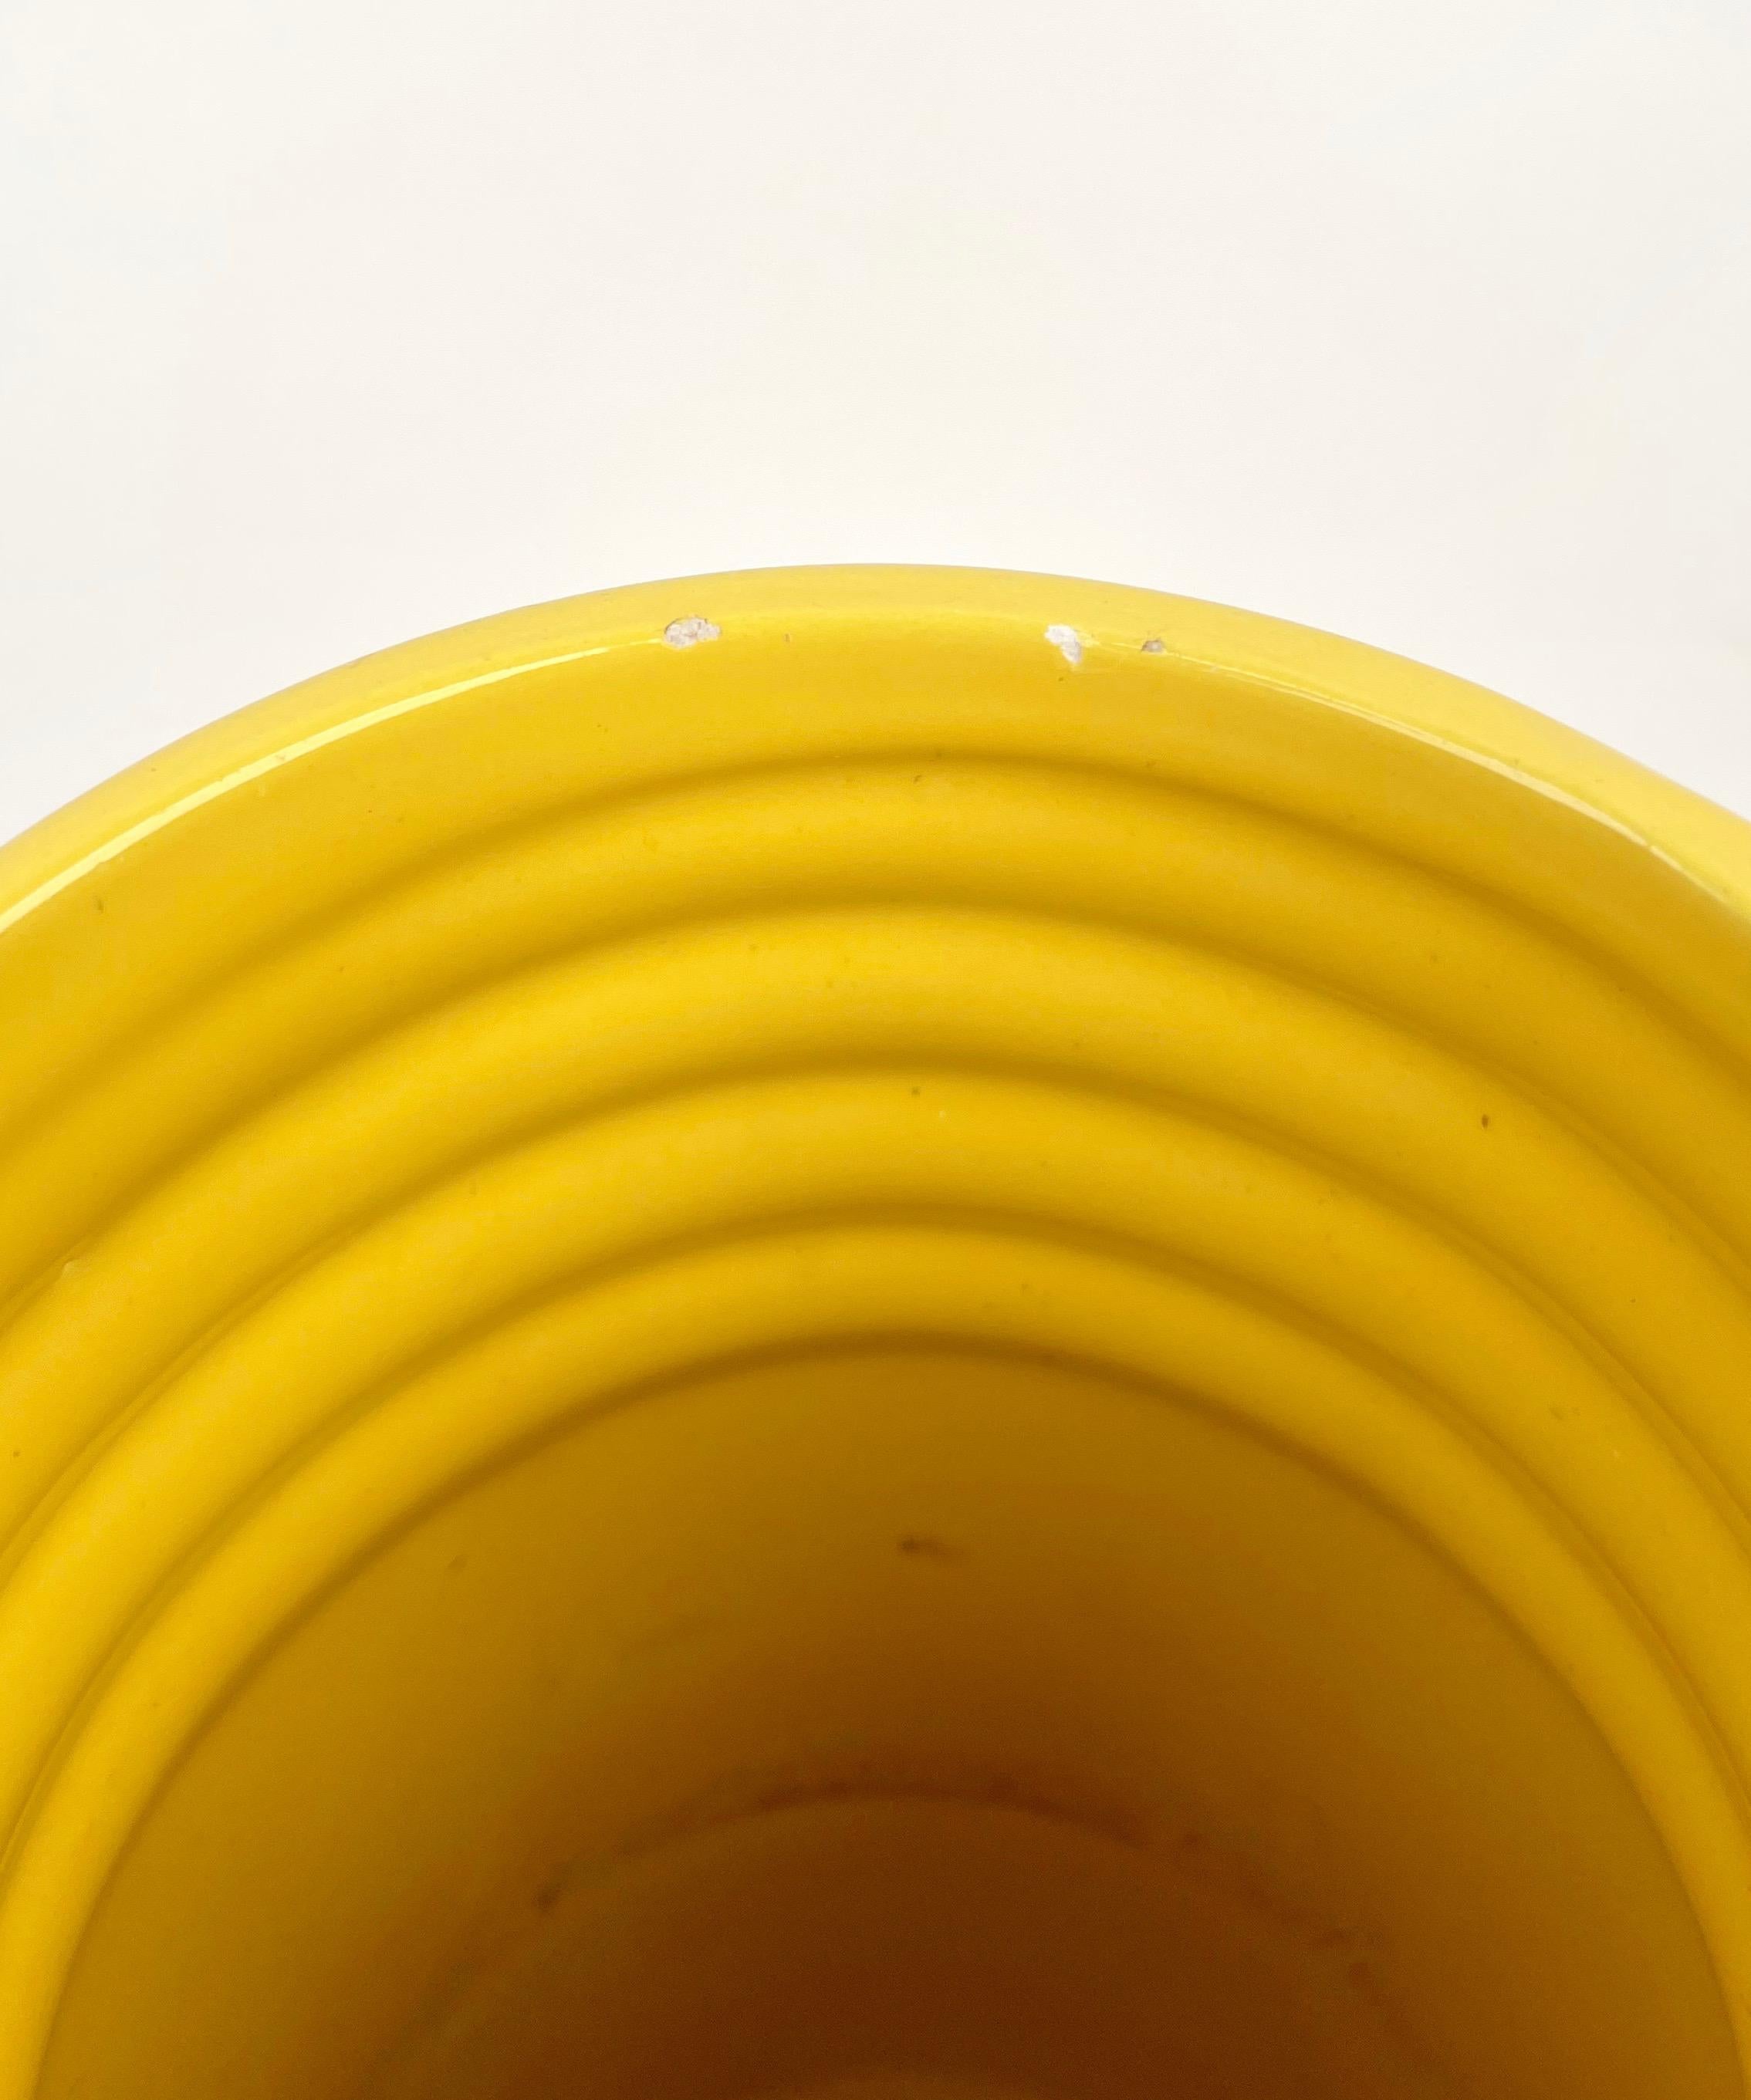 Yellow Ceramic Cylindric Vase by Il Picchio, Italy, 1960s For Sale 2